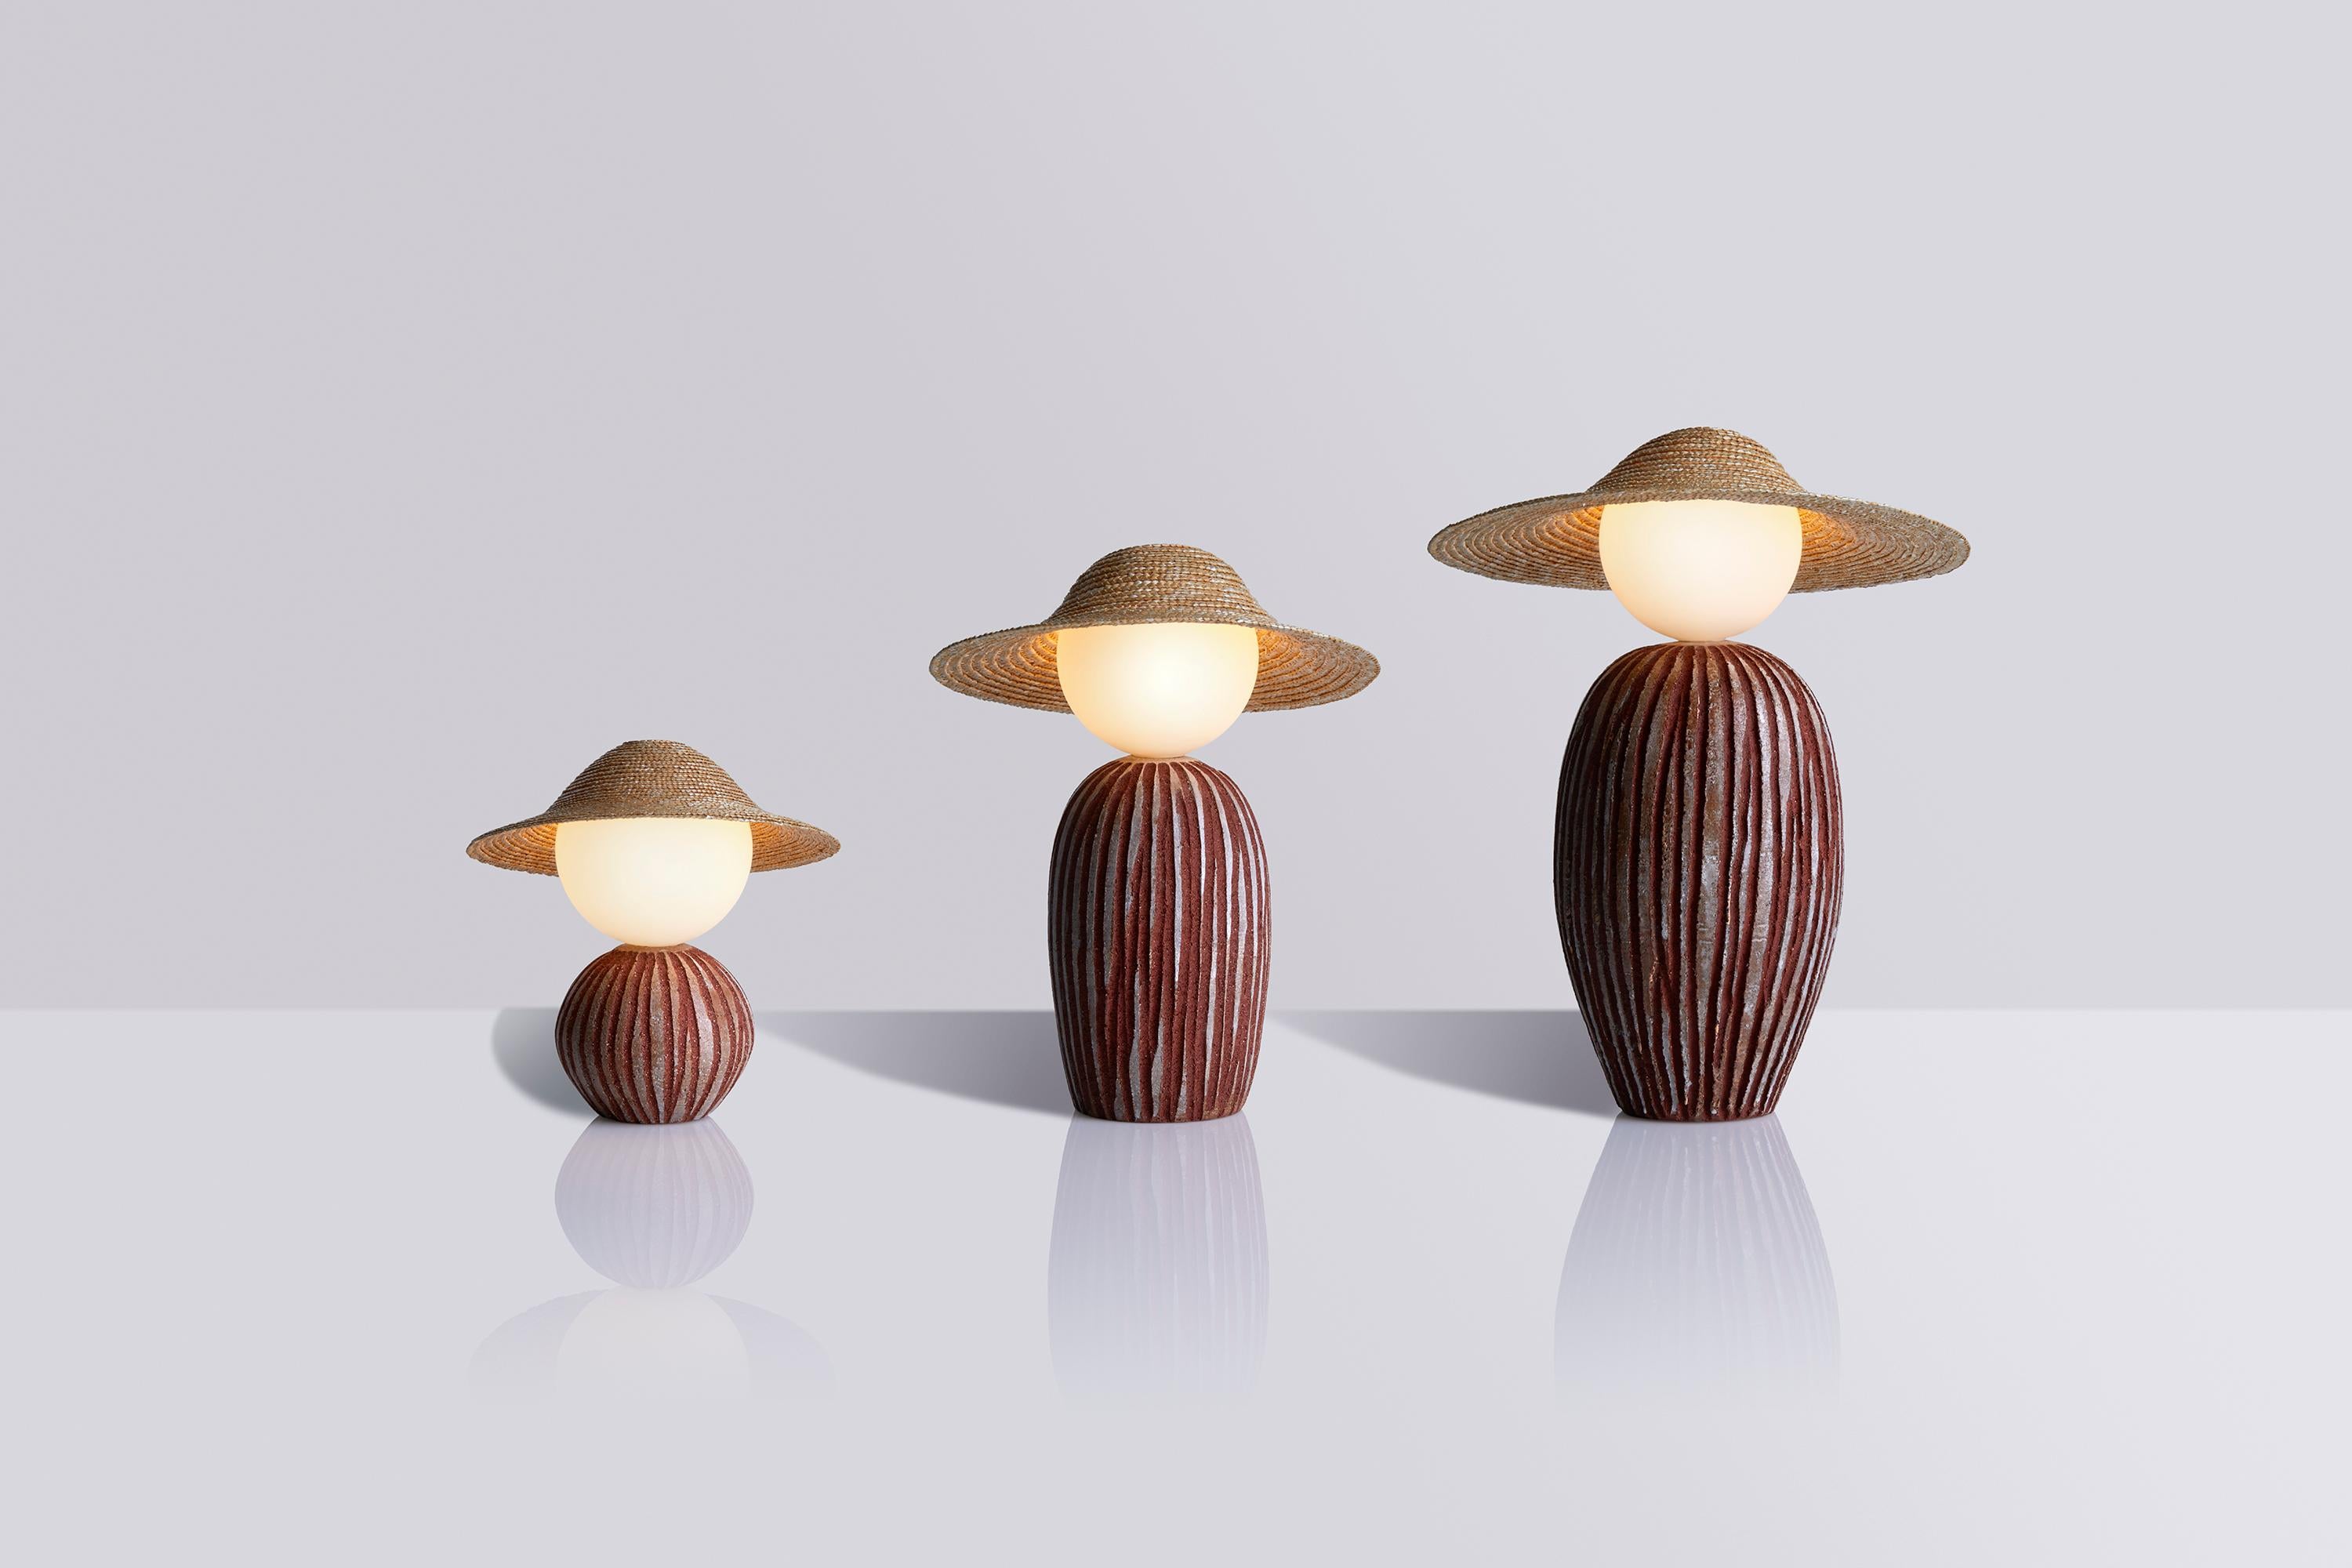 Théros Ceramic Limited Edition is the outcome of the creative coming-together of two creators: designer Aristotelis Barakos and ceramicist Giannis Zois.
It’s based on the concept of the Théros series of lighting objects designed by Aristotelis